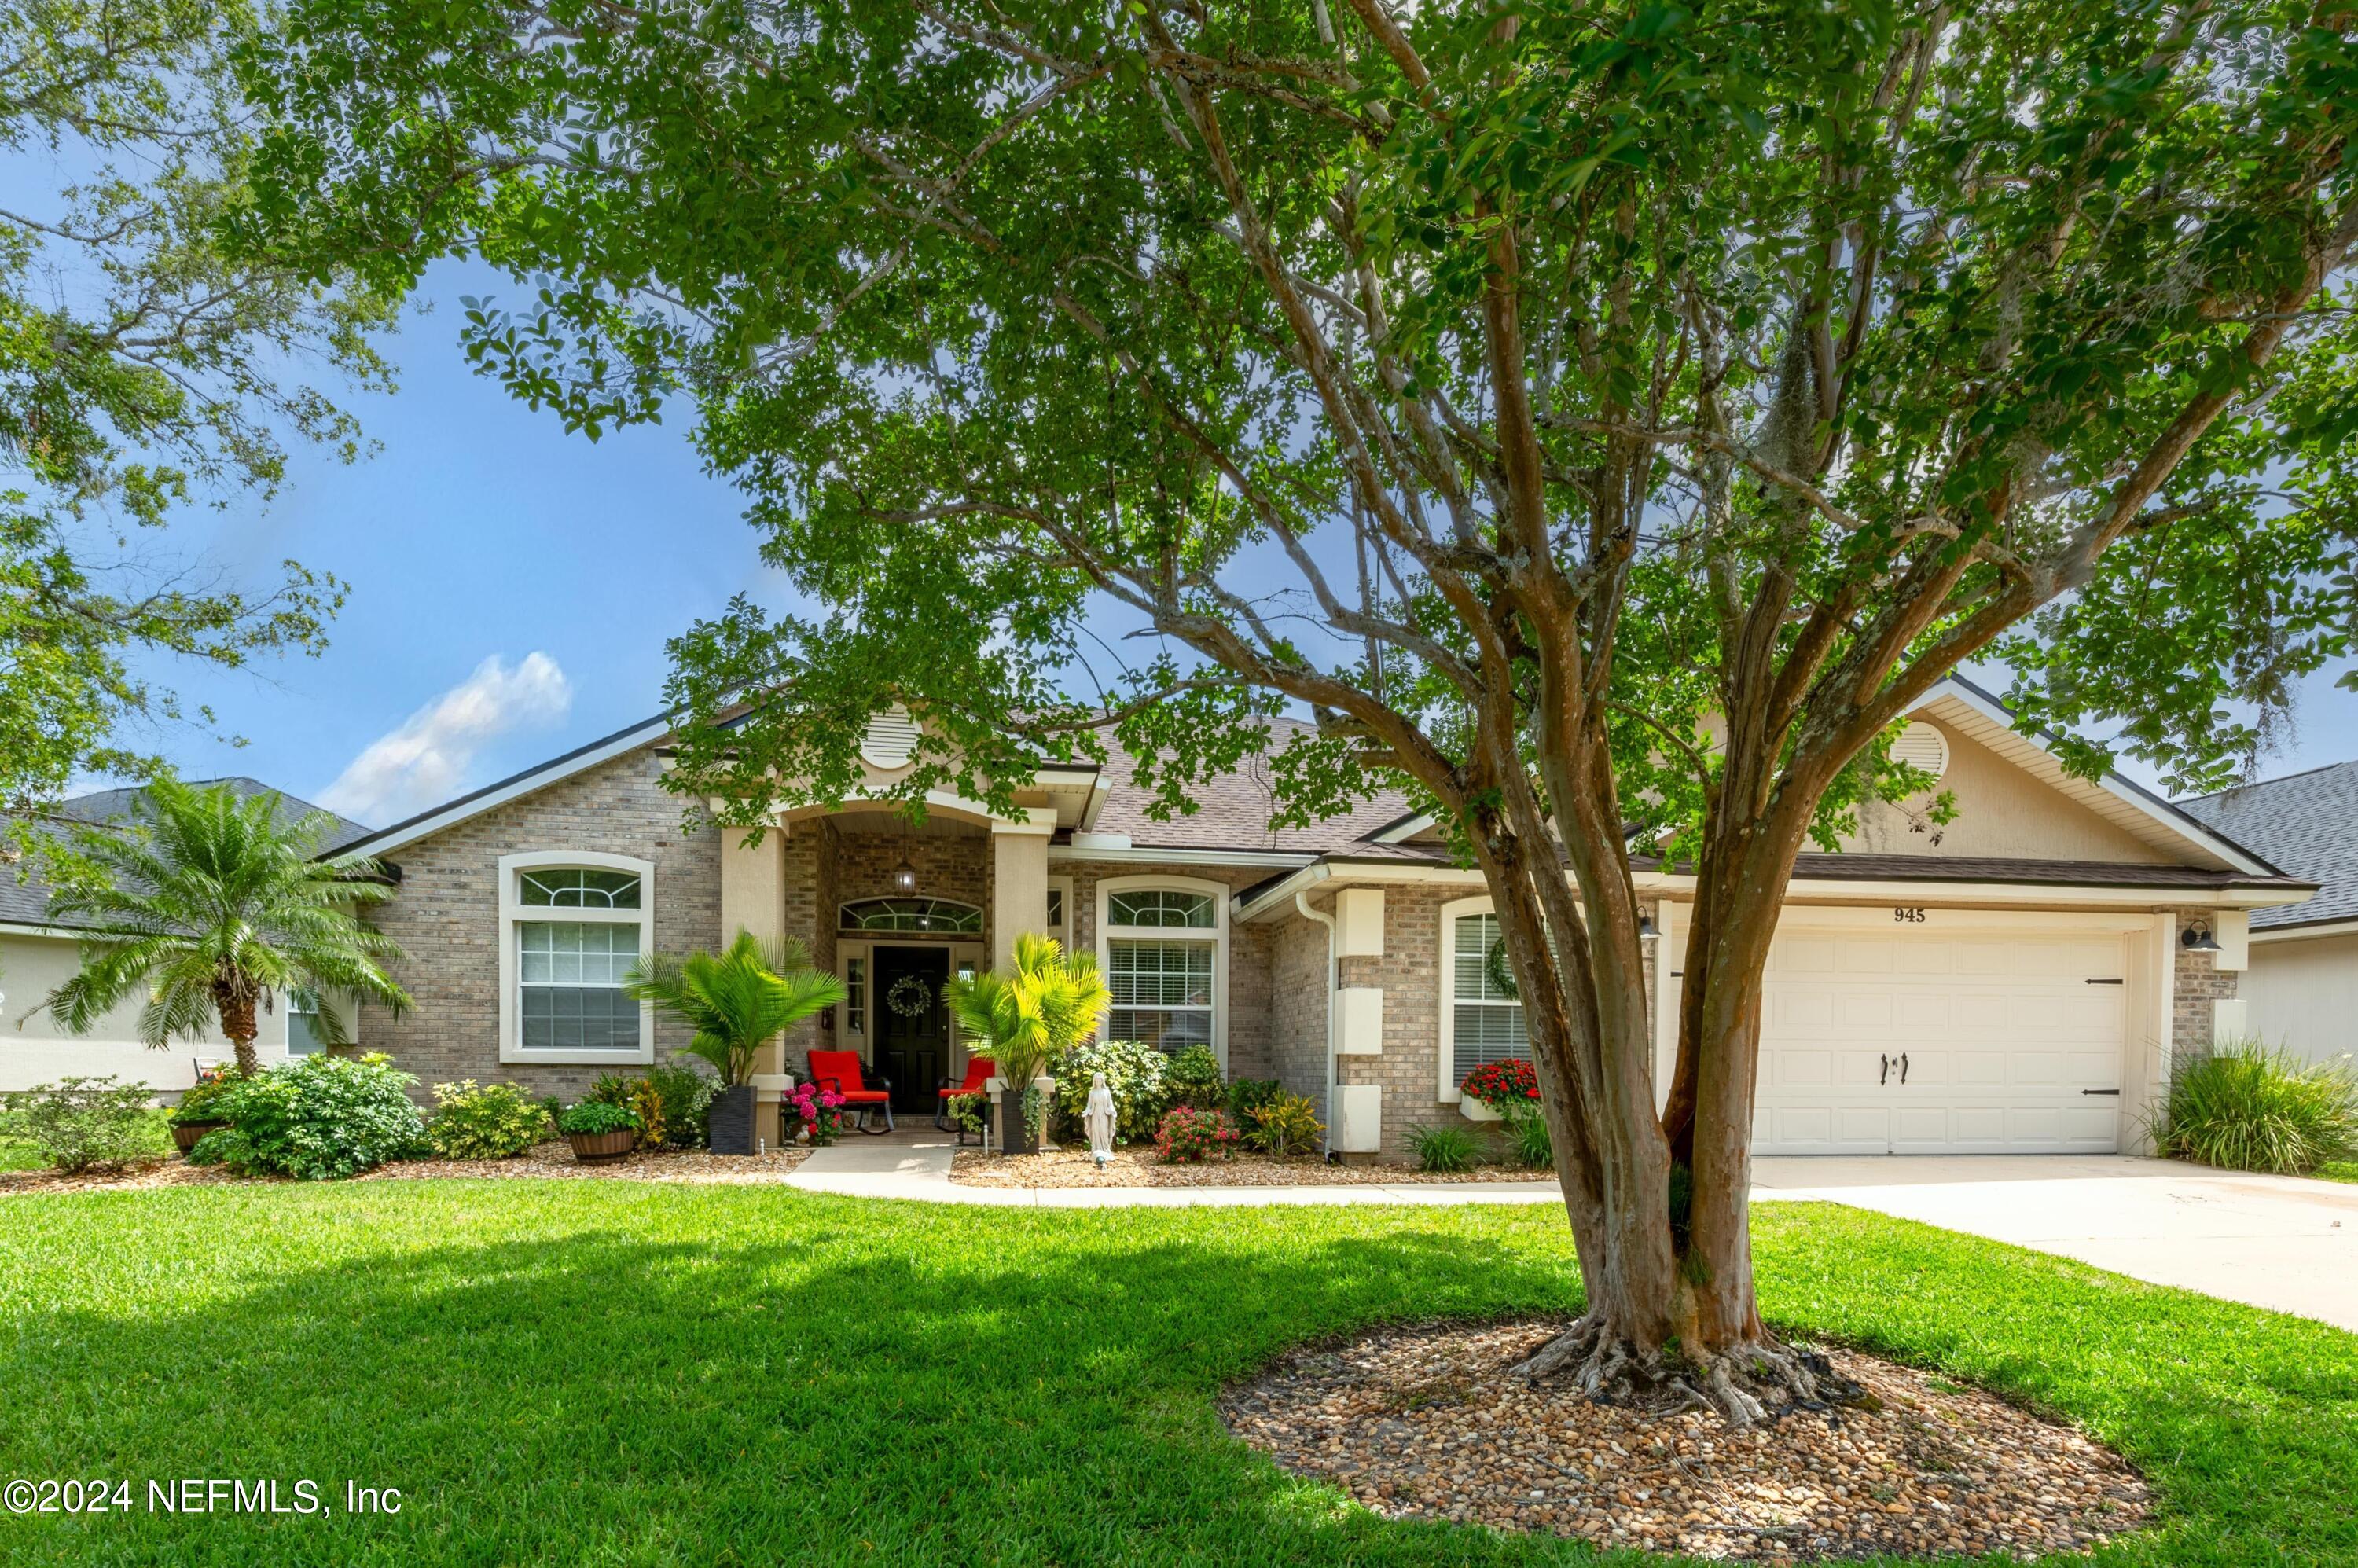 St Johns, FL home for sale located at 945 N Lilac Loop, St Johns, FL 32259